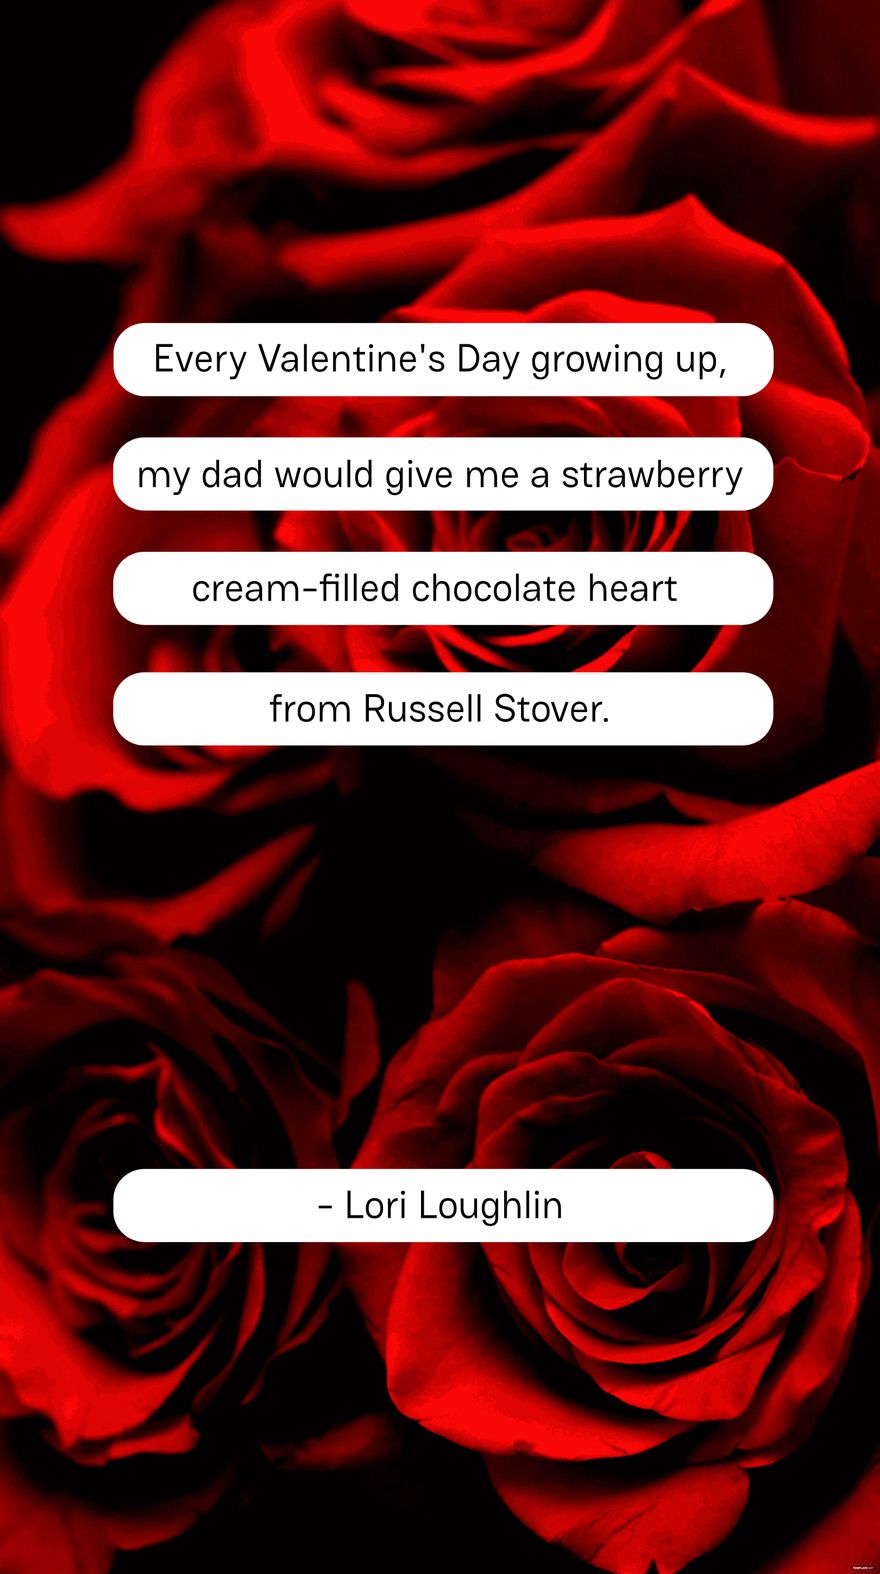 Free Lori Loughlin - Every Valentine's Day growing up, my dad would give me a strawberry cream-filled chocolate heart from Russell Stover.